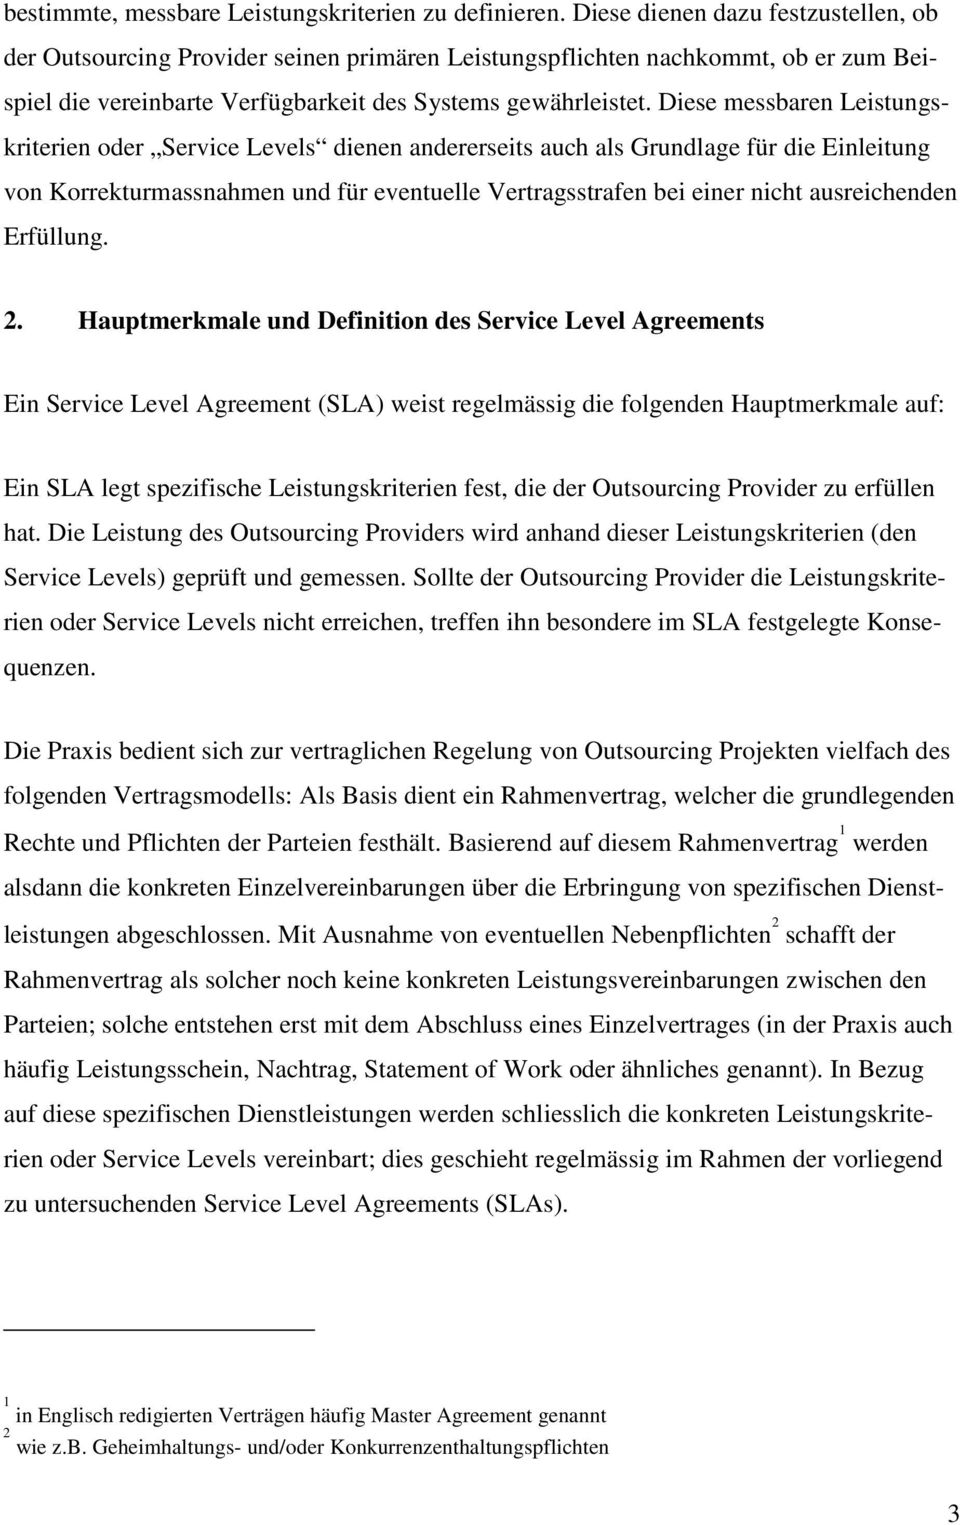 Service Level Agreements In Der Outsourcing Praxis Pdf